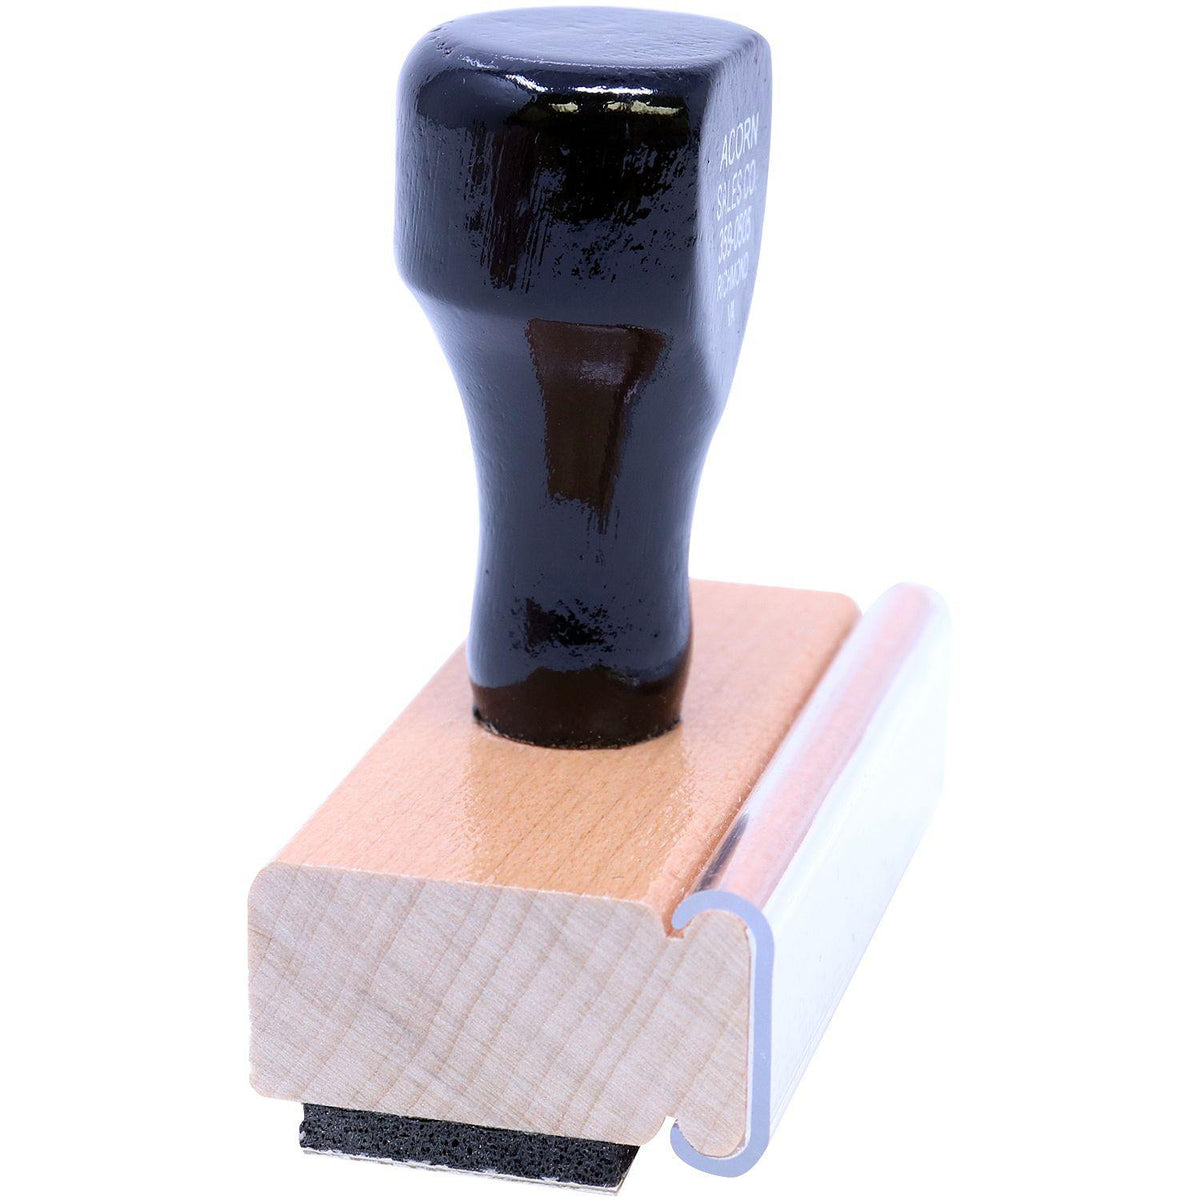 Side View of Final Notice Rubber Stamp at an Angle